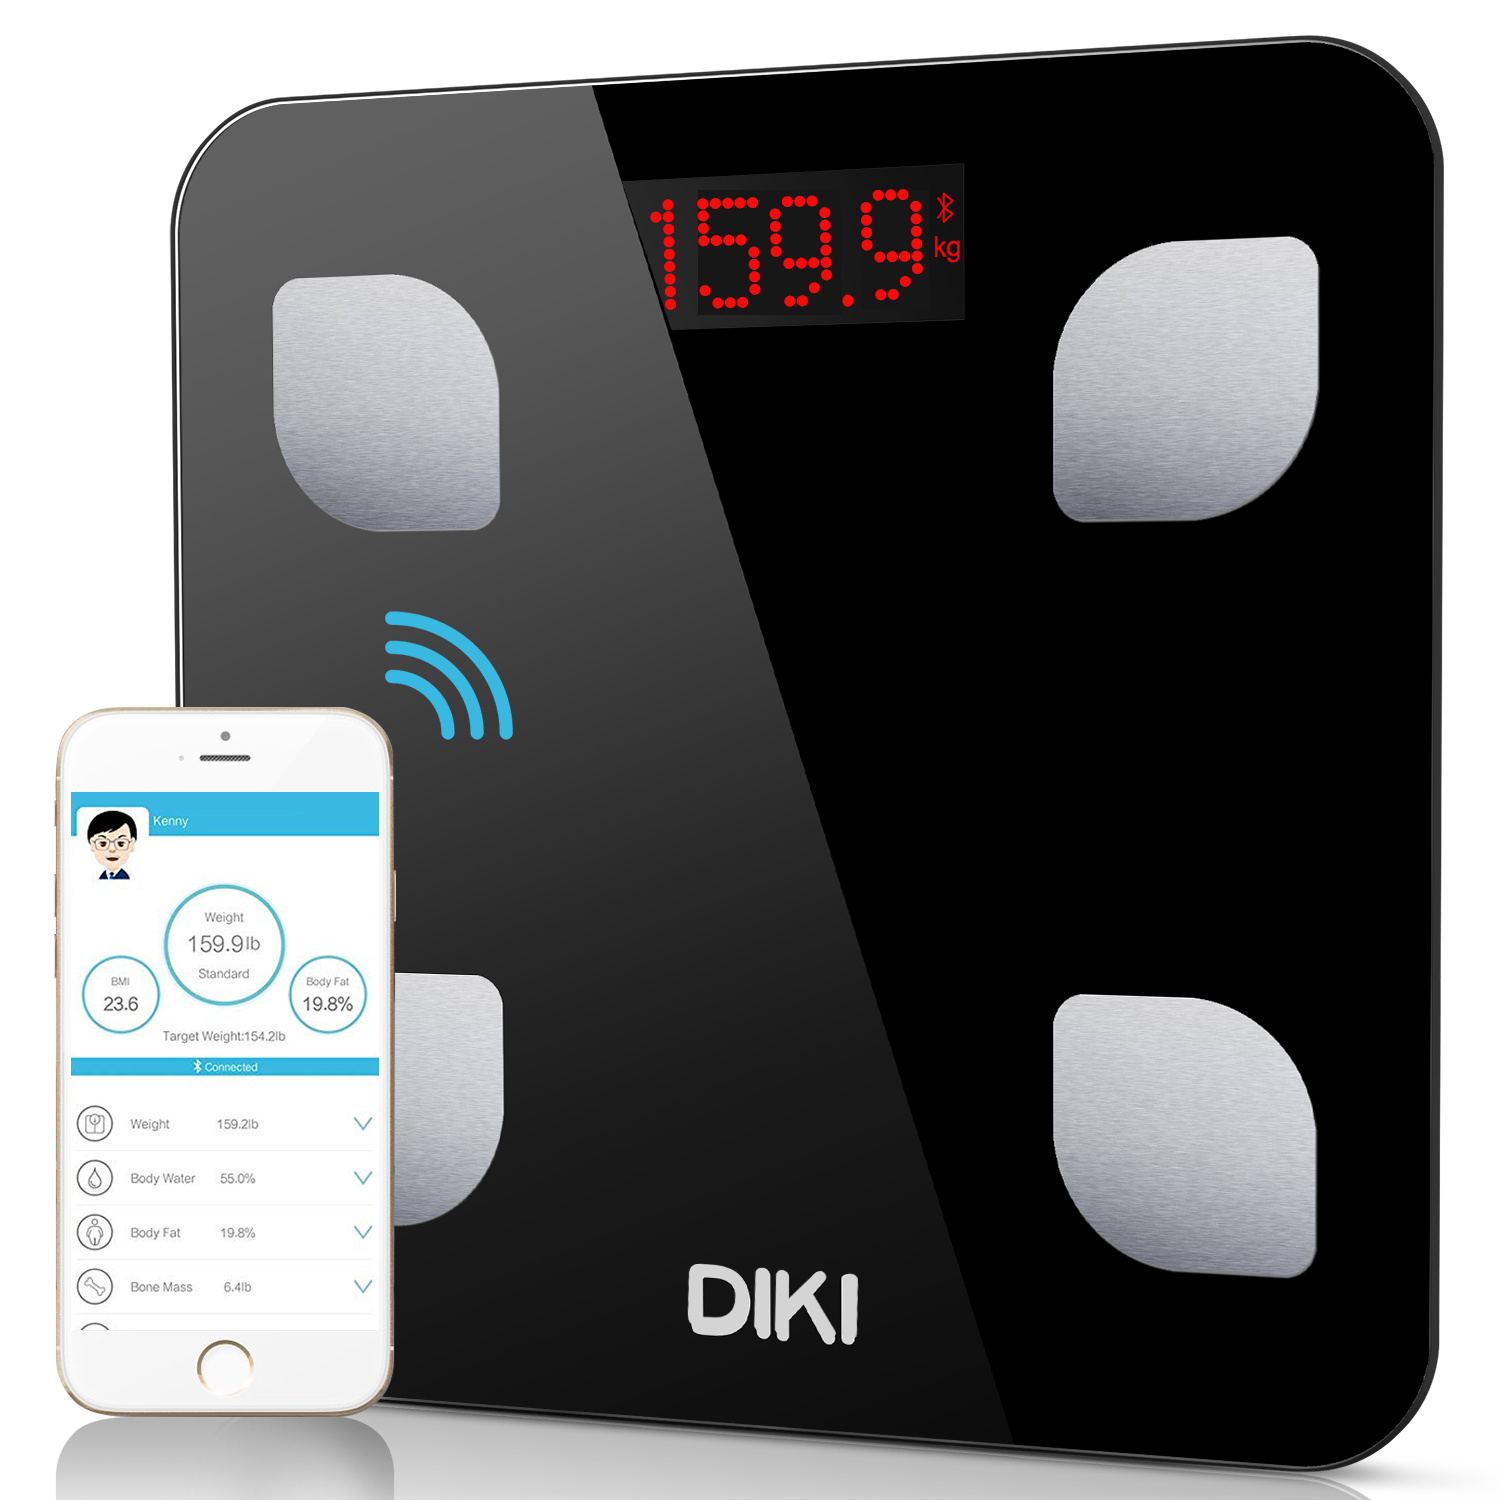 Body Fat Scales,DiKi Bluetooth Body Weight Scale with IOS and Android Devices,High Precision Digital Bathroom Scales,Digital Body Weight with Unlimited Users App/8 Body Components Data/Step On (Black)